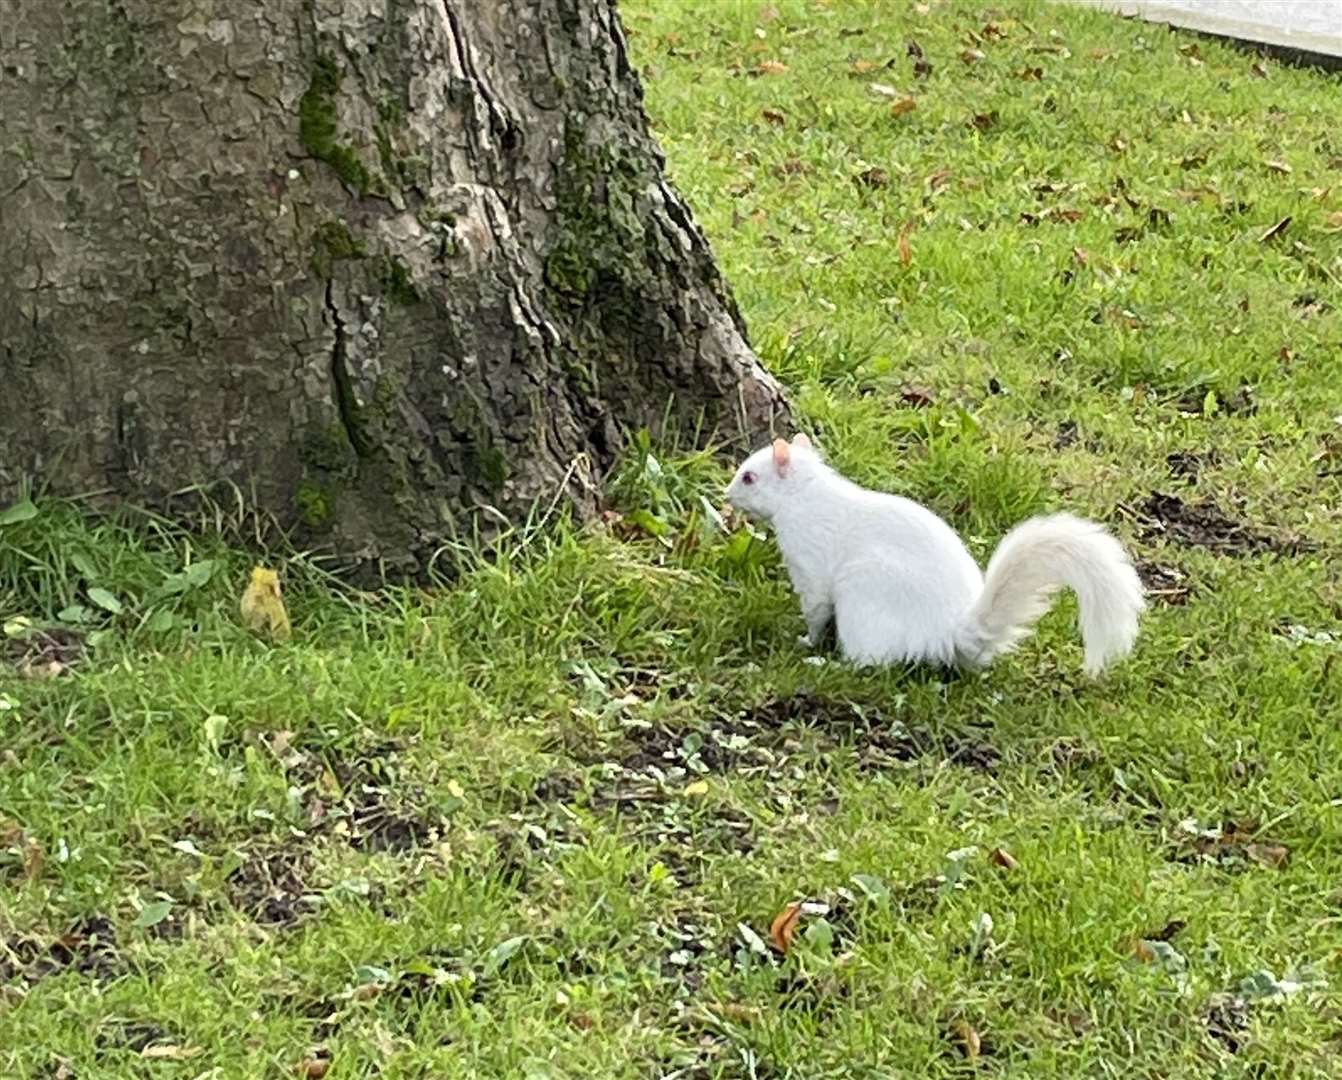 An albino squirrel spotted in Chatham cemetery grounds. Picture: Lewis Keemar